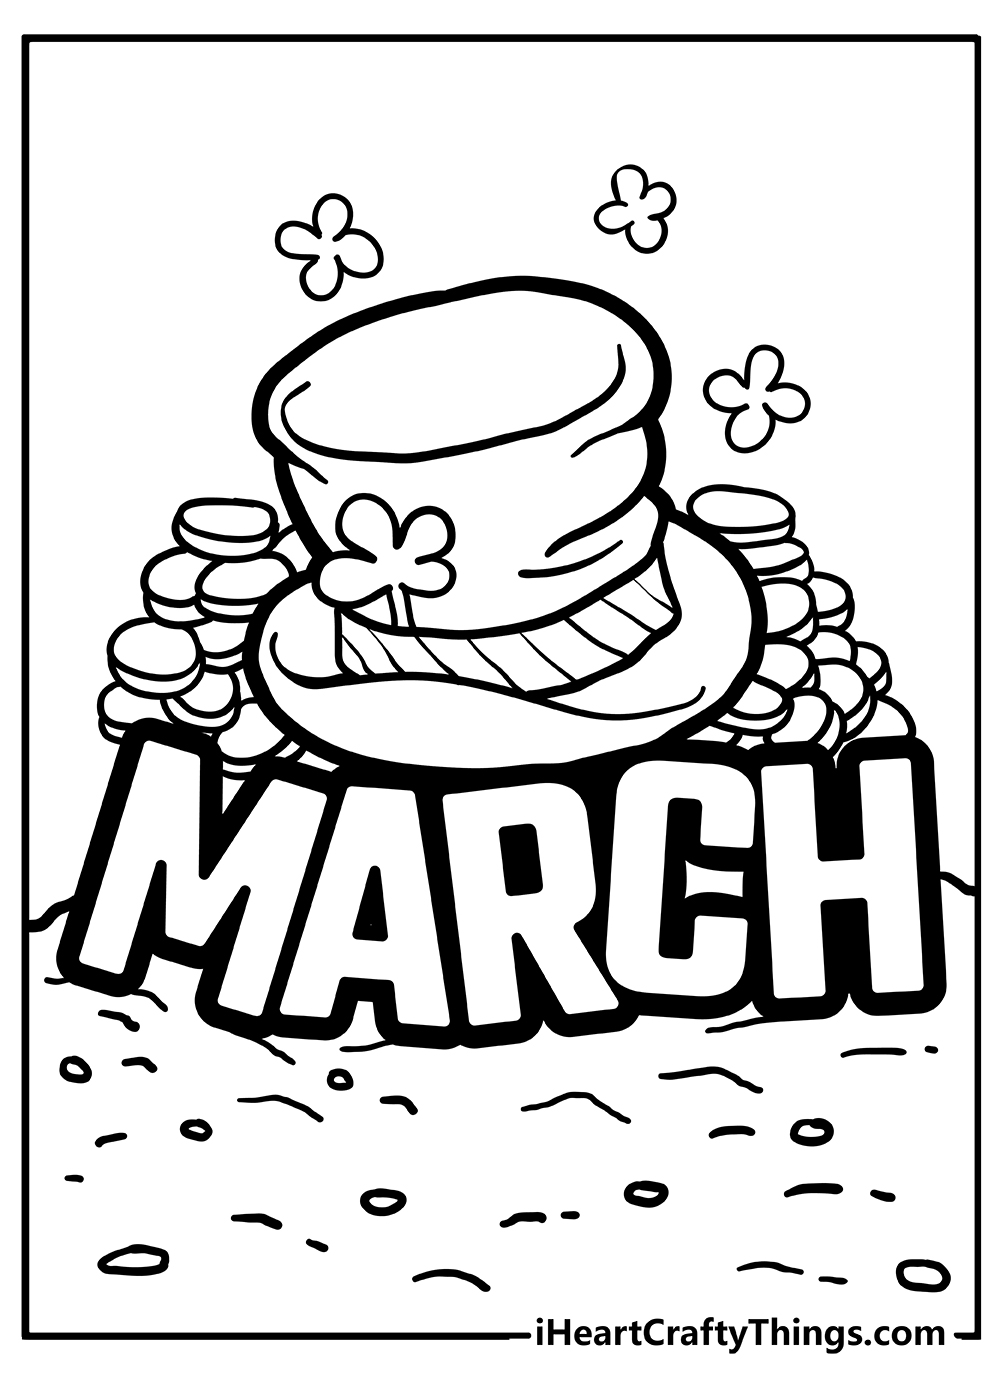 March Coloring Sheet for children free download